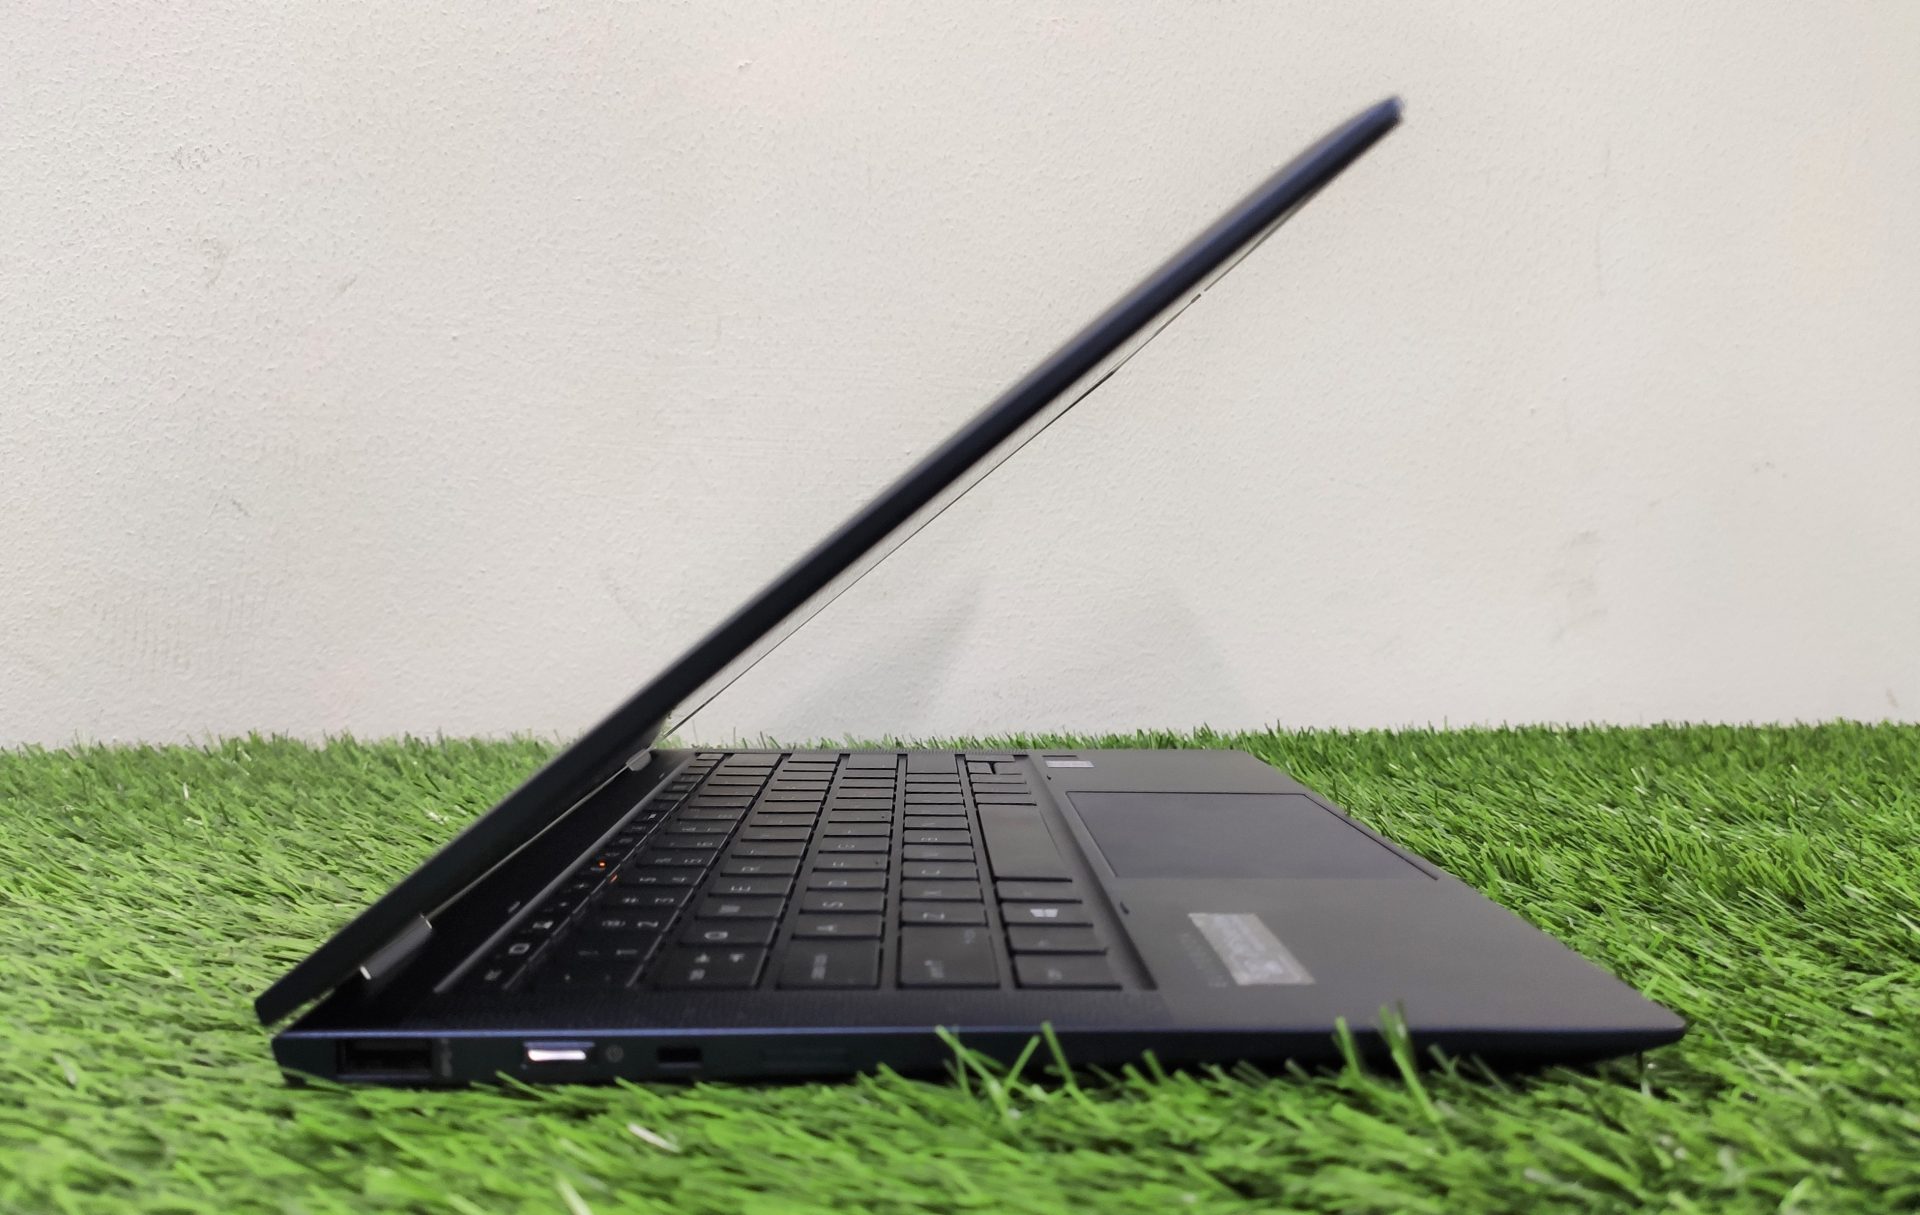 Hp Elite Dragonfly Notebook Review The Tech Revolutionist 6332